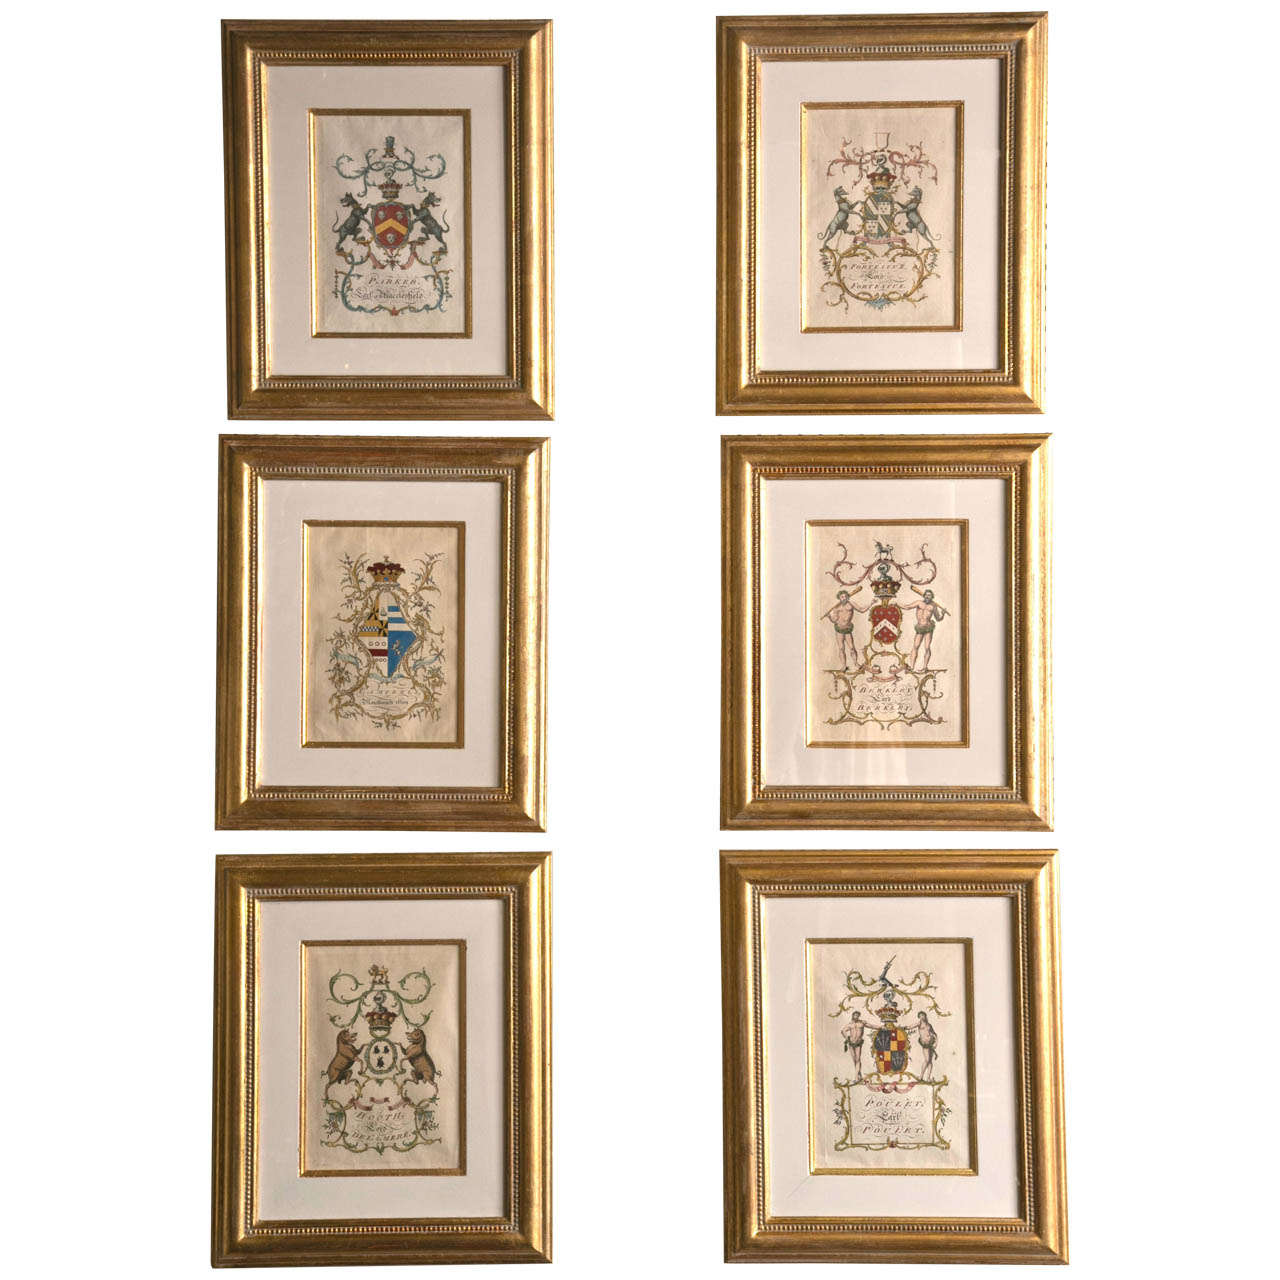 Set of 5 Hand Colored Family Coats of Arms